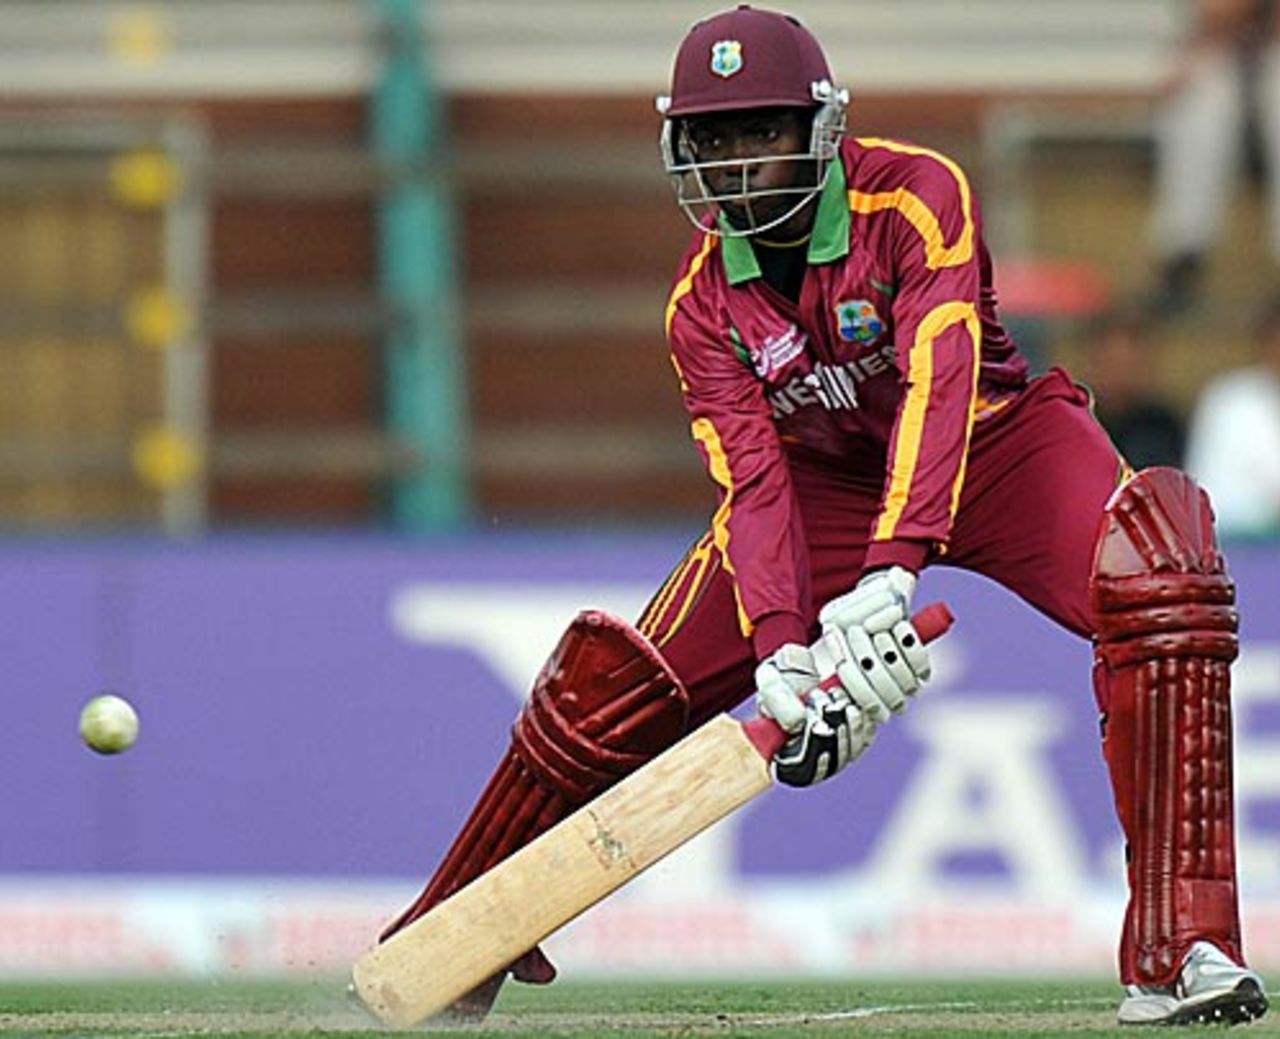 Nikita Miller steers one behind point , Pakistan v West Indies, Champions Trophy, Group A, Johannesburg, September 23, 2009